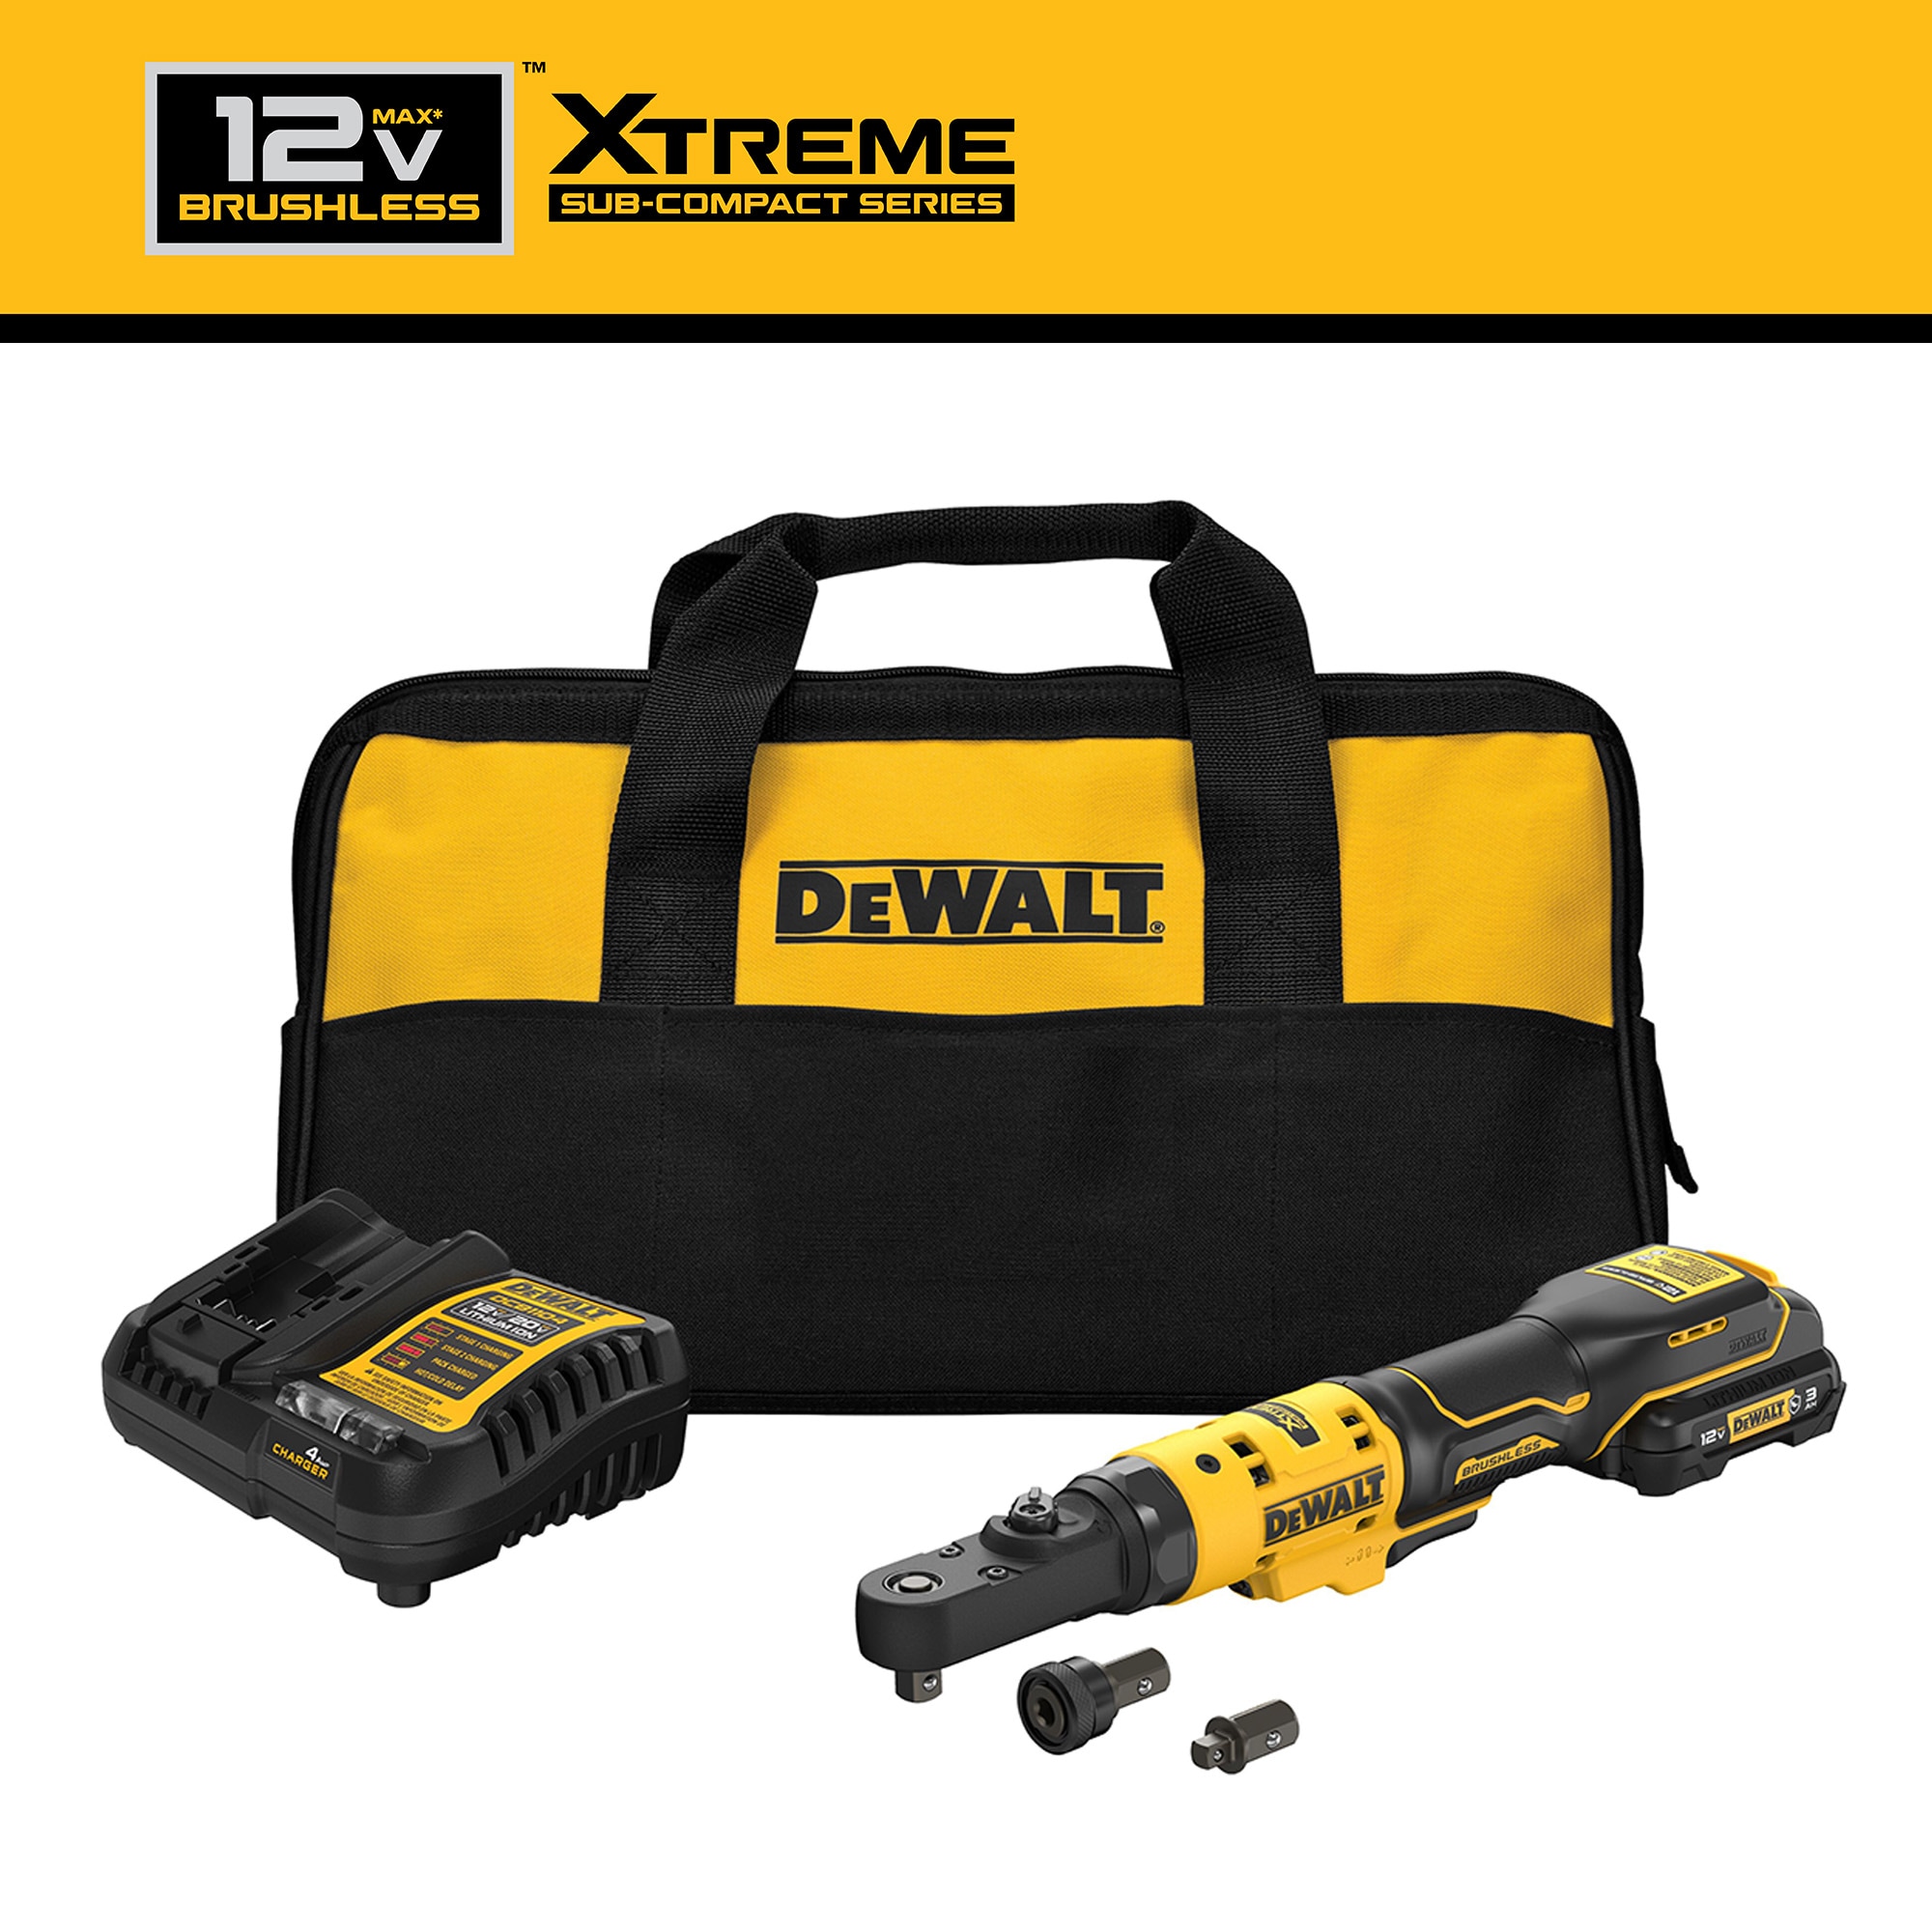 DEWALT XR 20-volt Max Variable Speed Brushless 3/8-in,1/2-in Drive